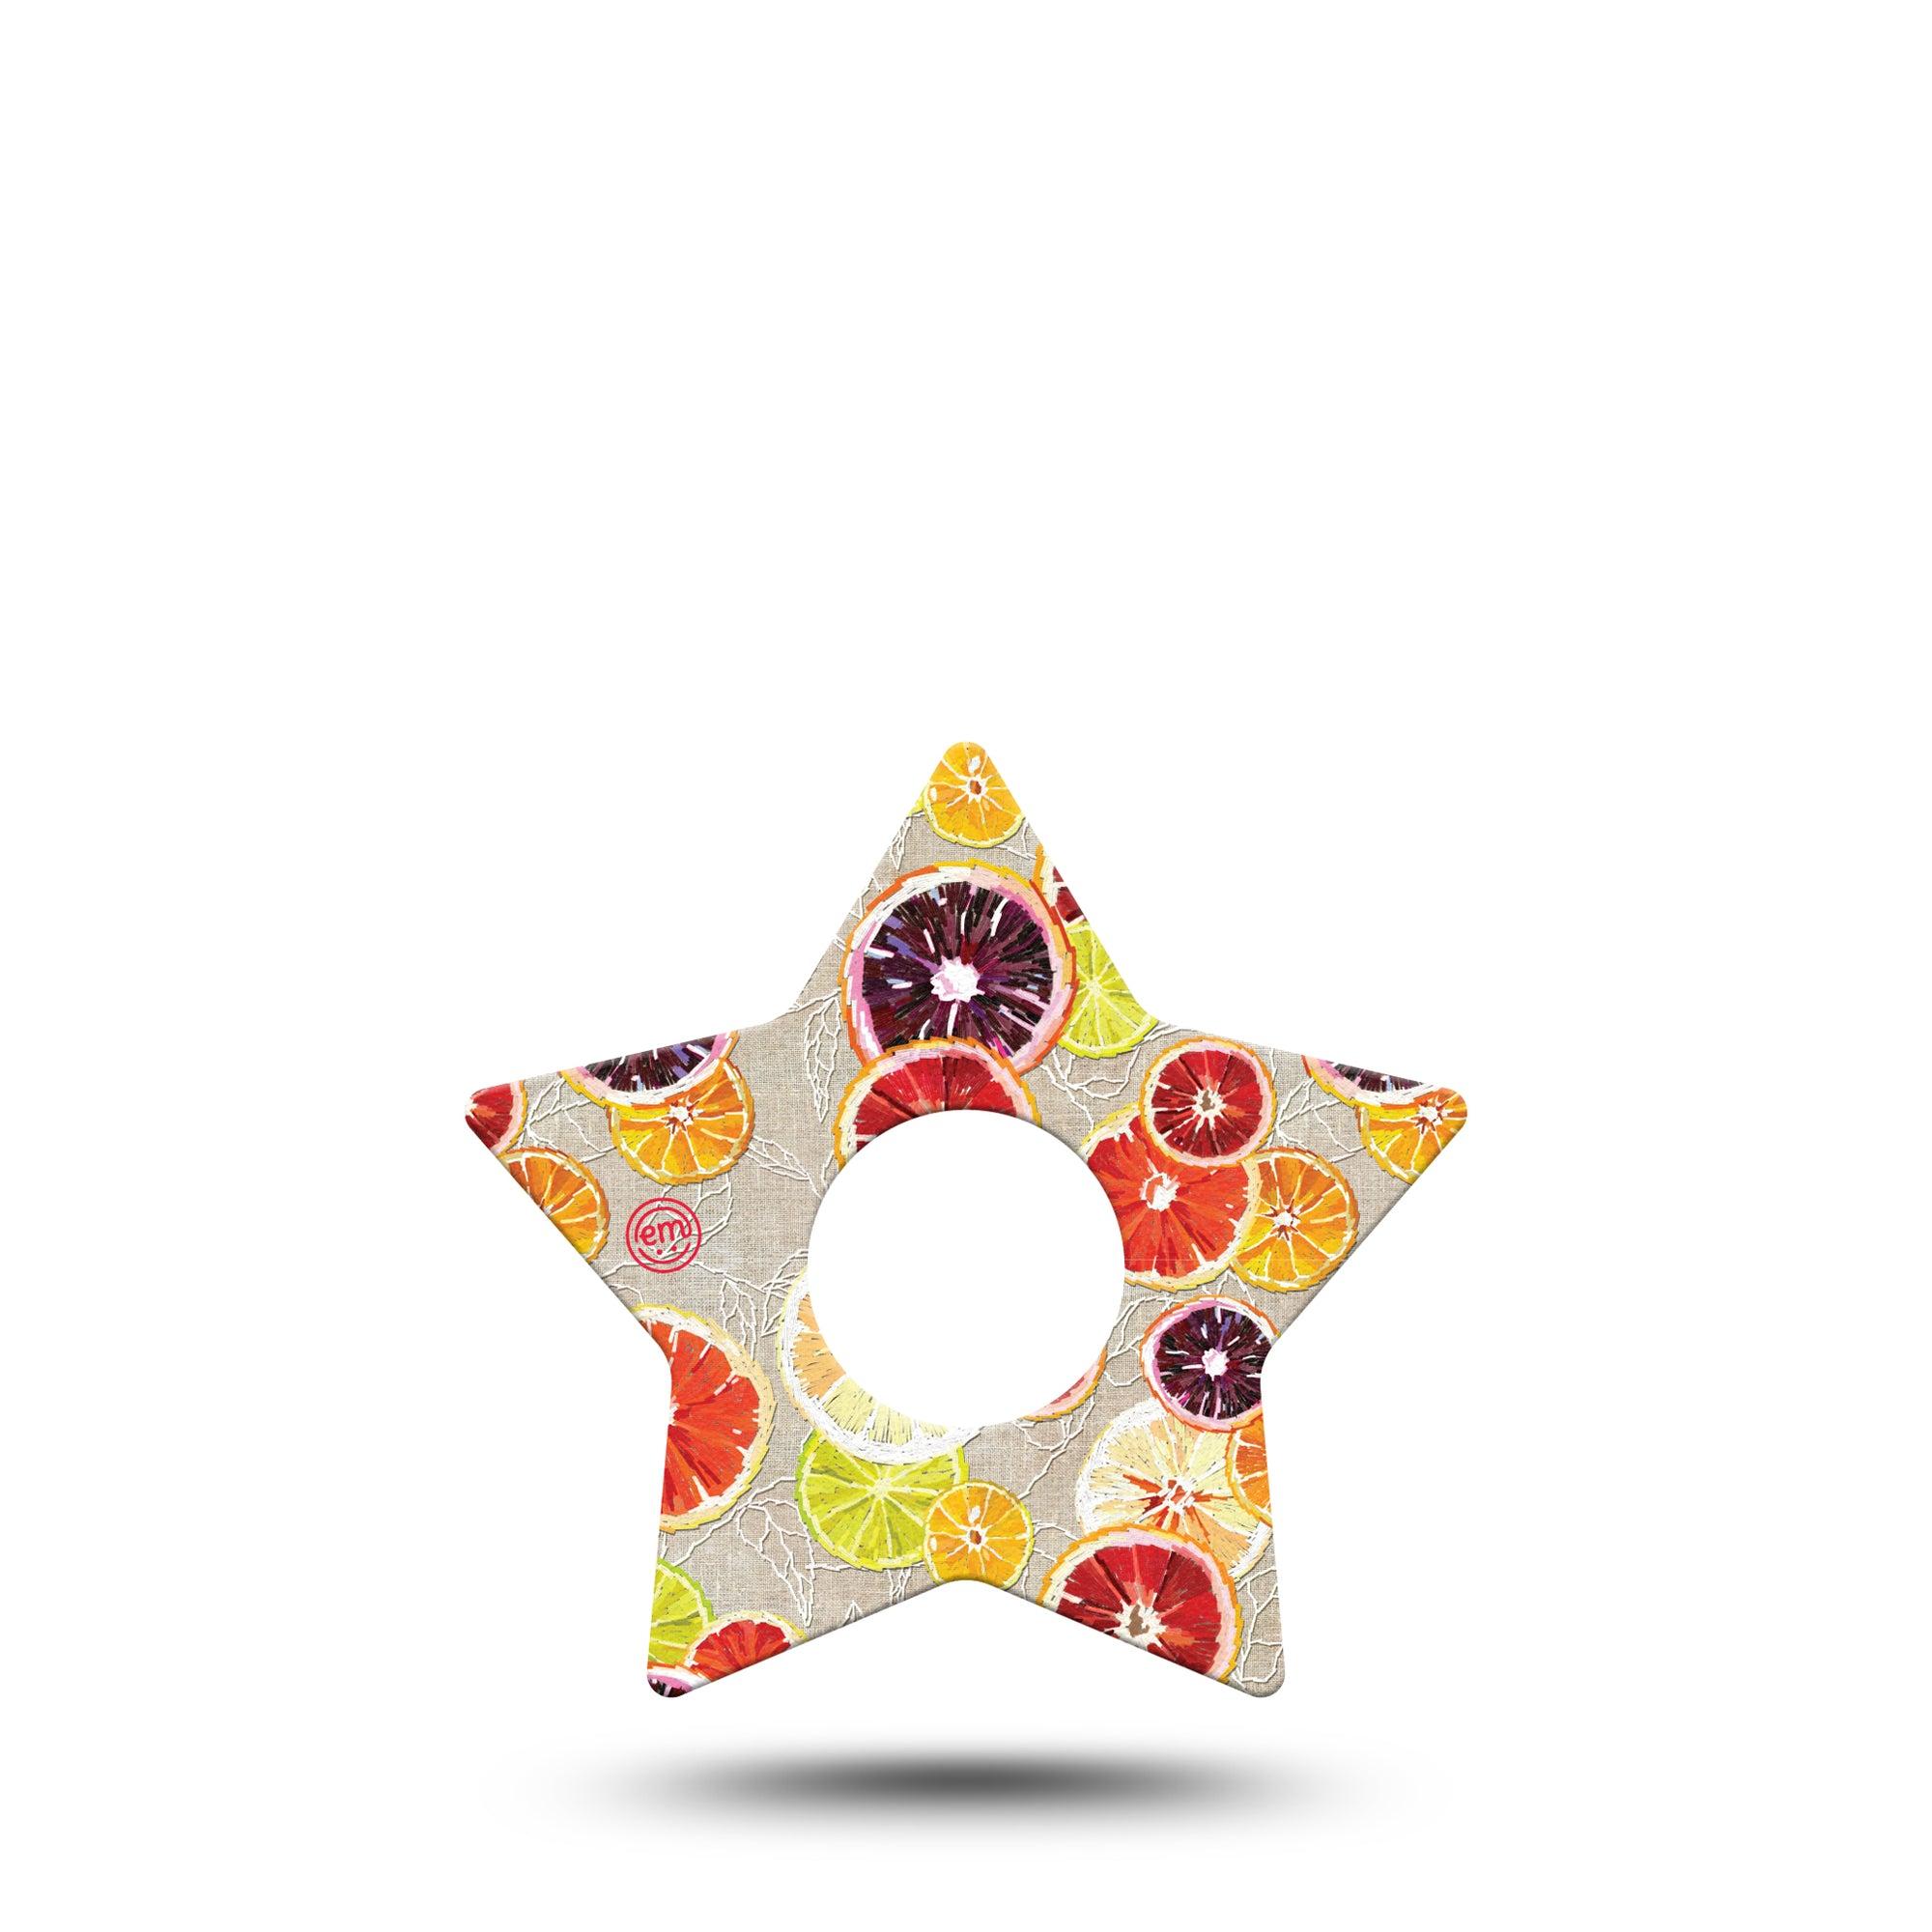 ExpressionMed Citrus Slices Star Libre 3 Tape, Single, Dried Fruits Themed, CGM Plastic Patch Design